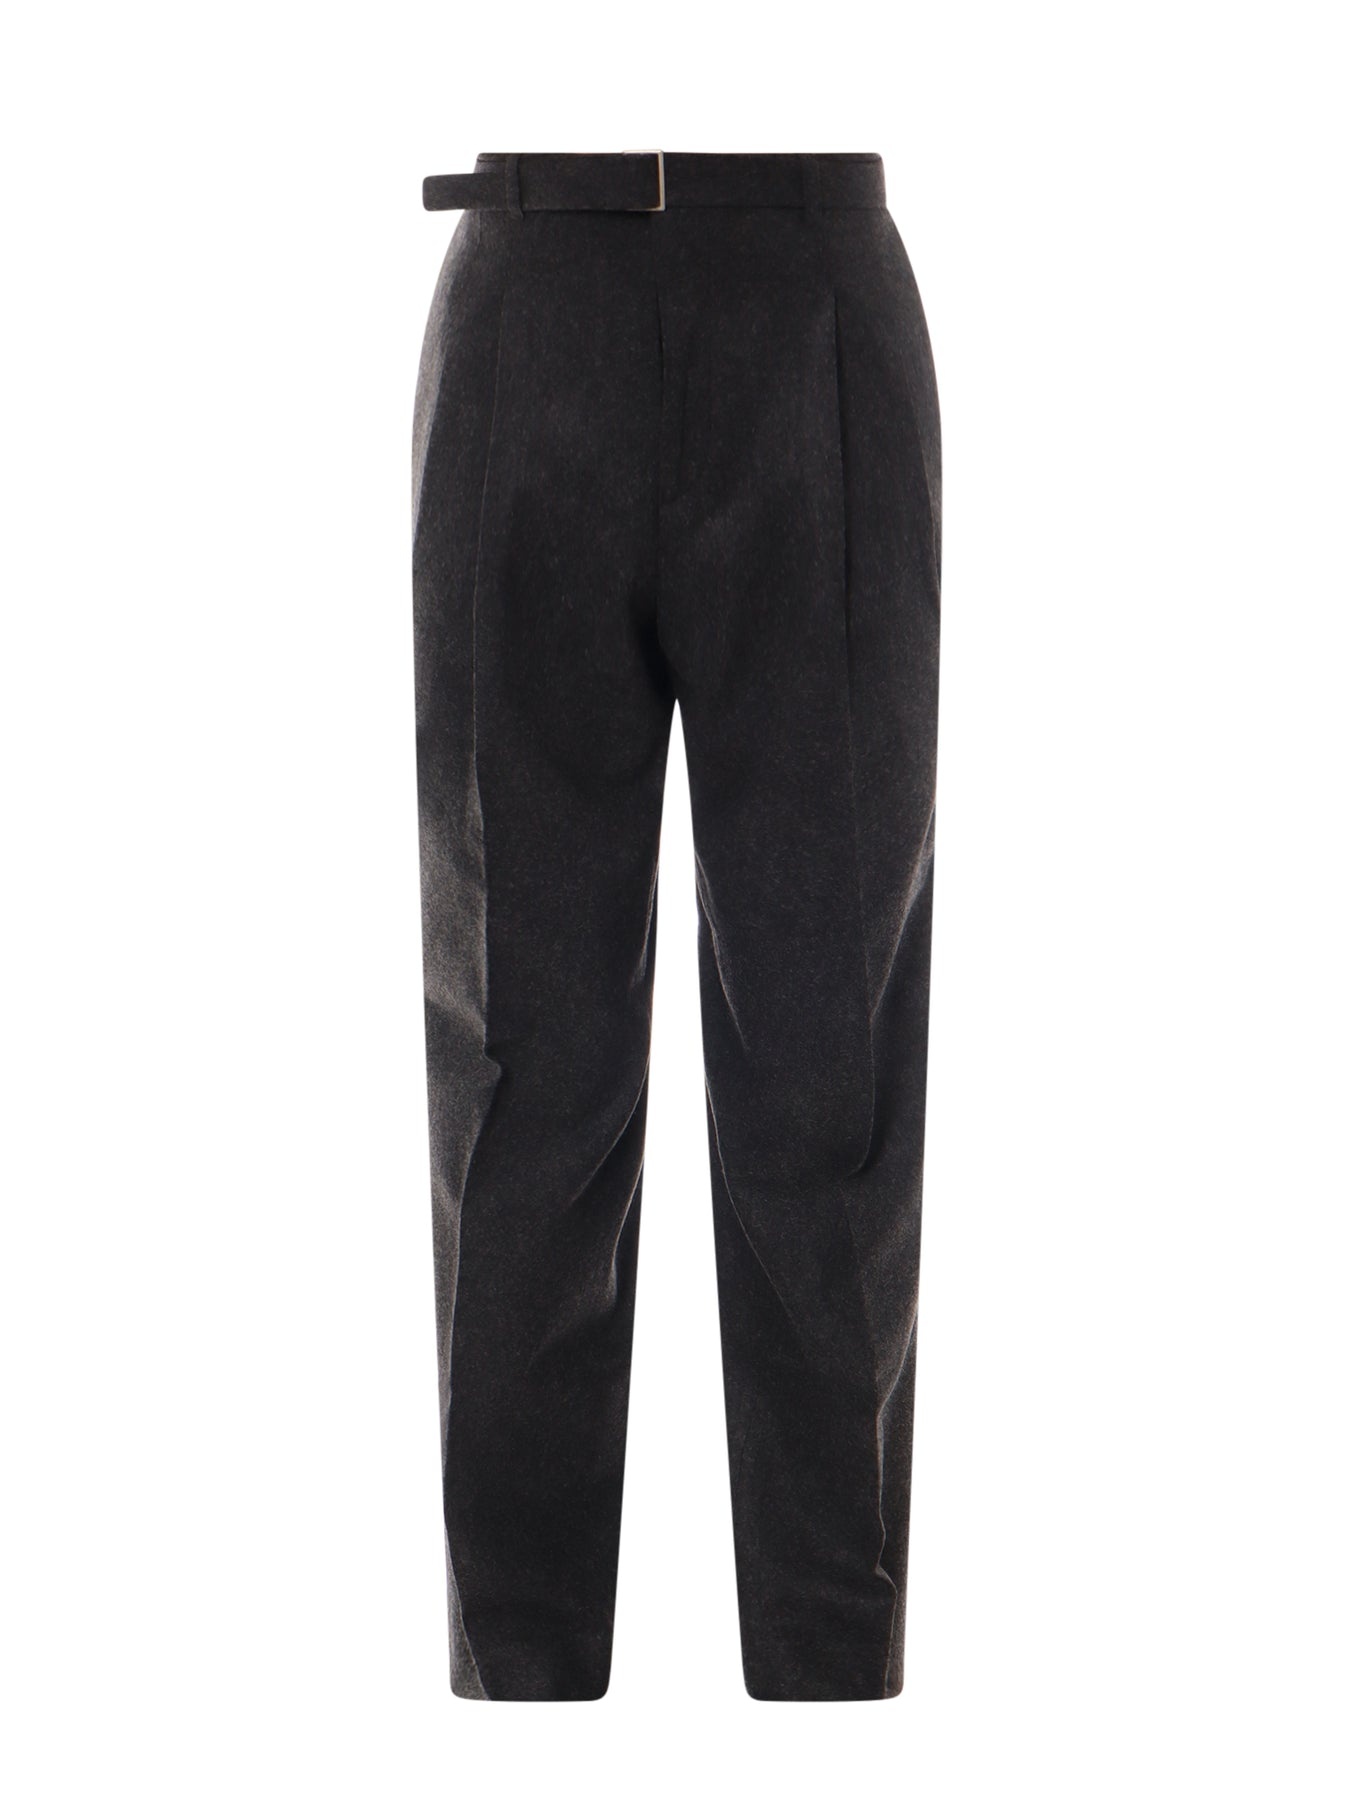 Wool blend trouser with removable belt at waist - 1